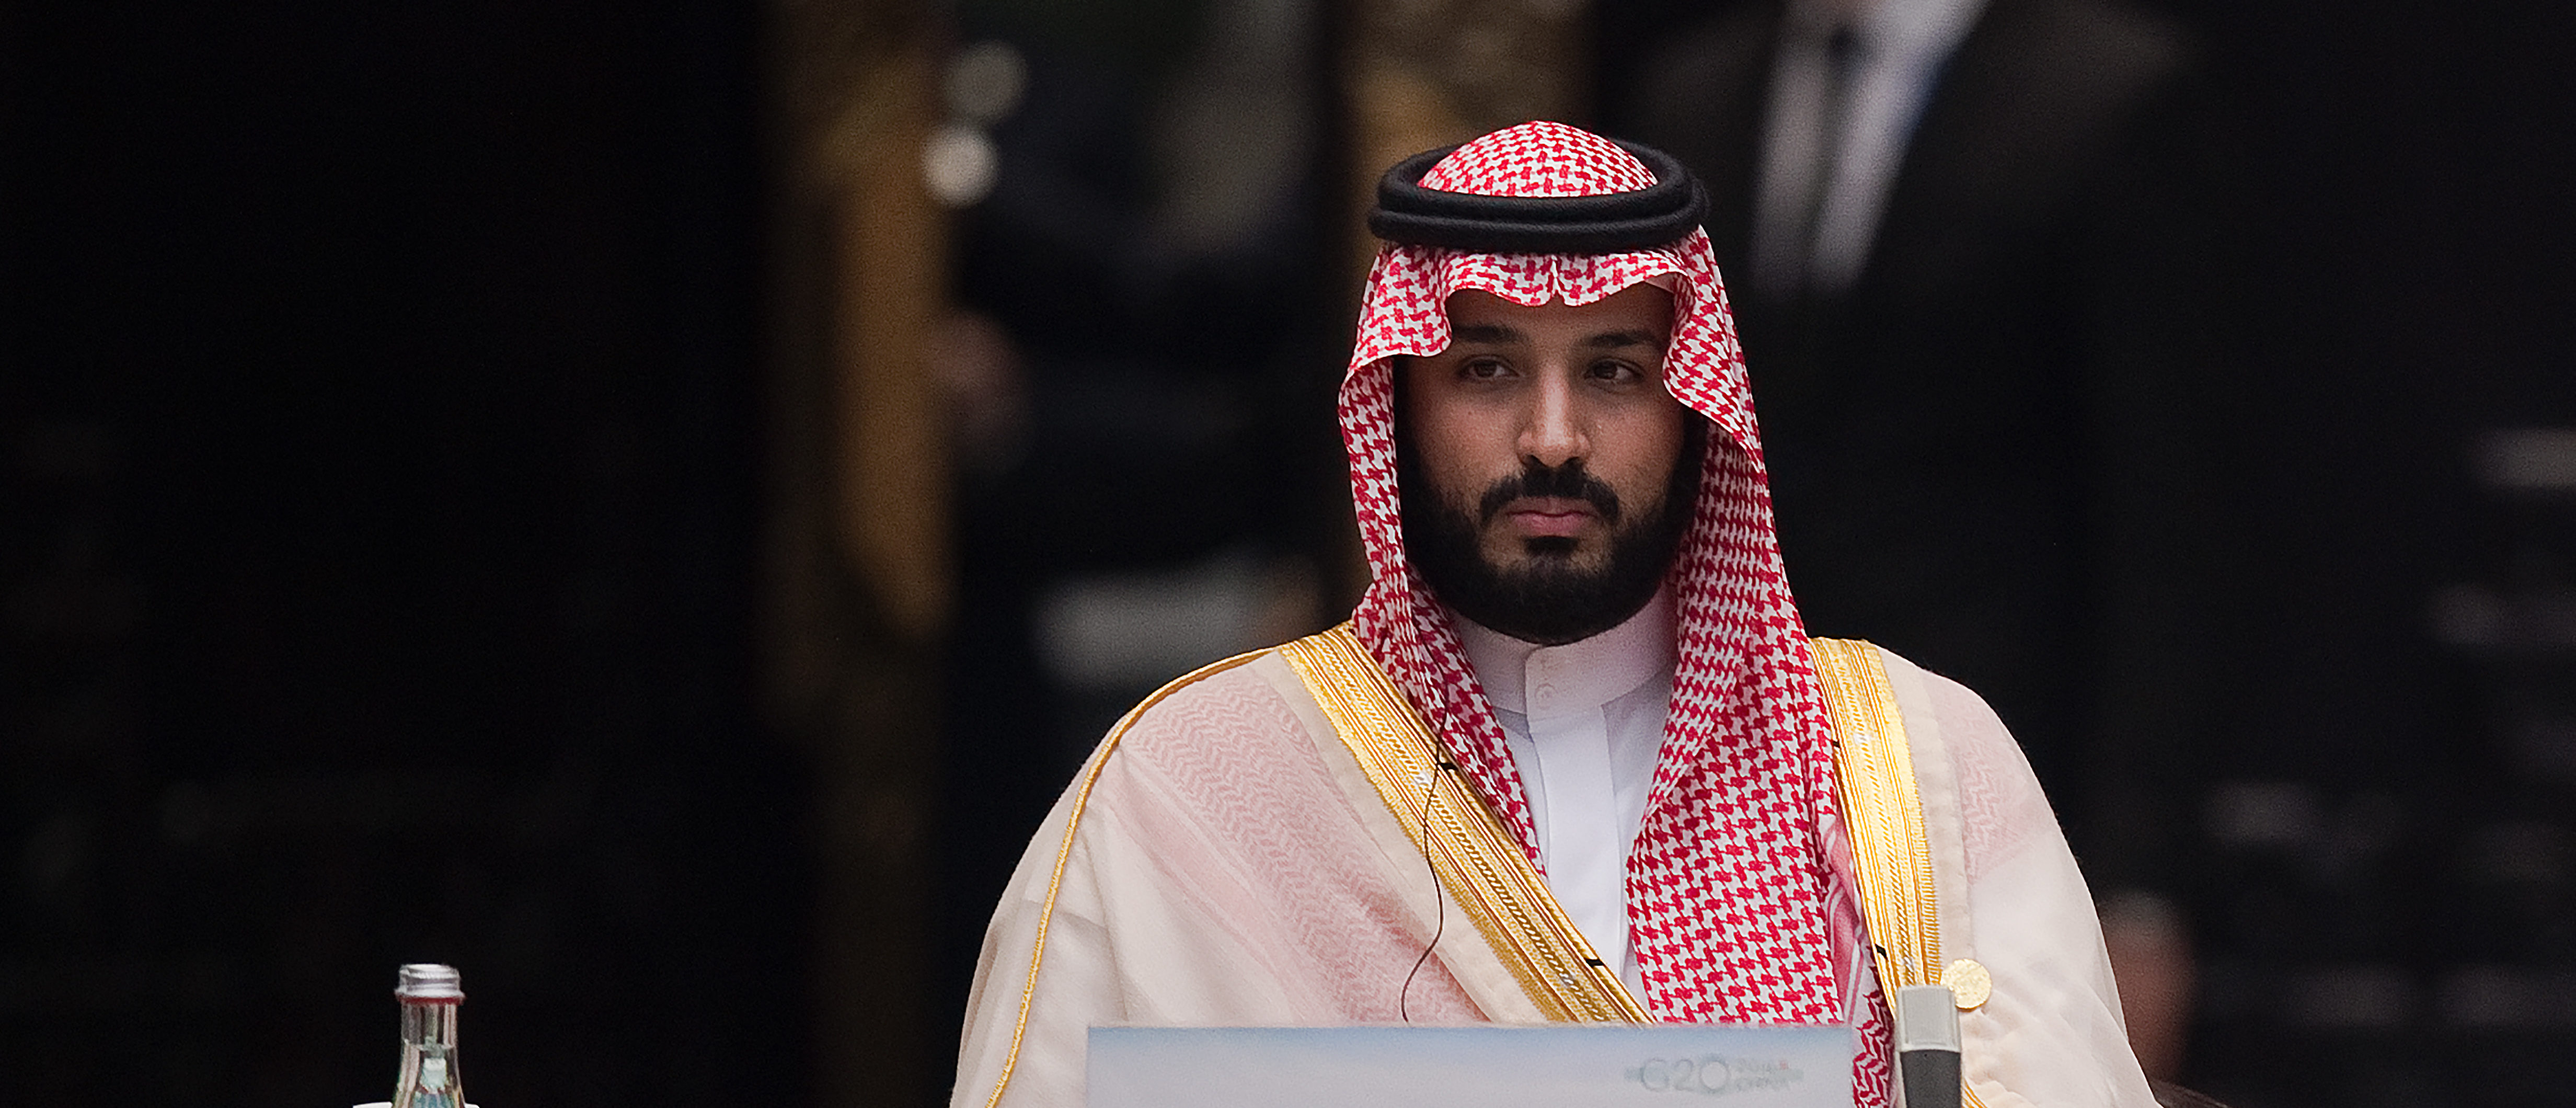 HANGZHOU, CHINA - SEPTEMBER 04: Saudi Arabia Deputy Crown Prince Mohammed bin Salman attends the G20 opening ceremony at the Hangzhou International Expo Center on September 4, 2016 in Hangzhou, China. World leaders are gathering for the 11th G20 Summit from September 4-5. (Photo by Nicolas Asfouri - Pool/Getty Images)